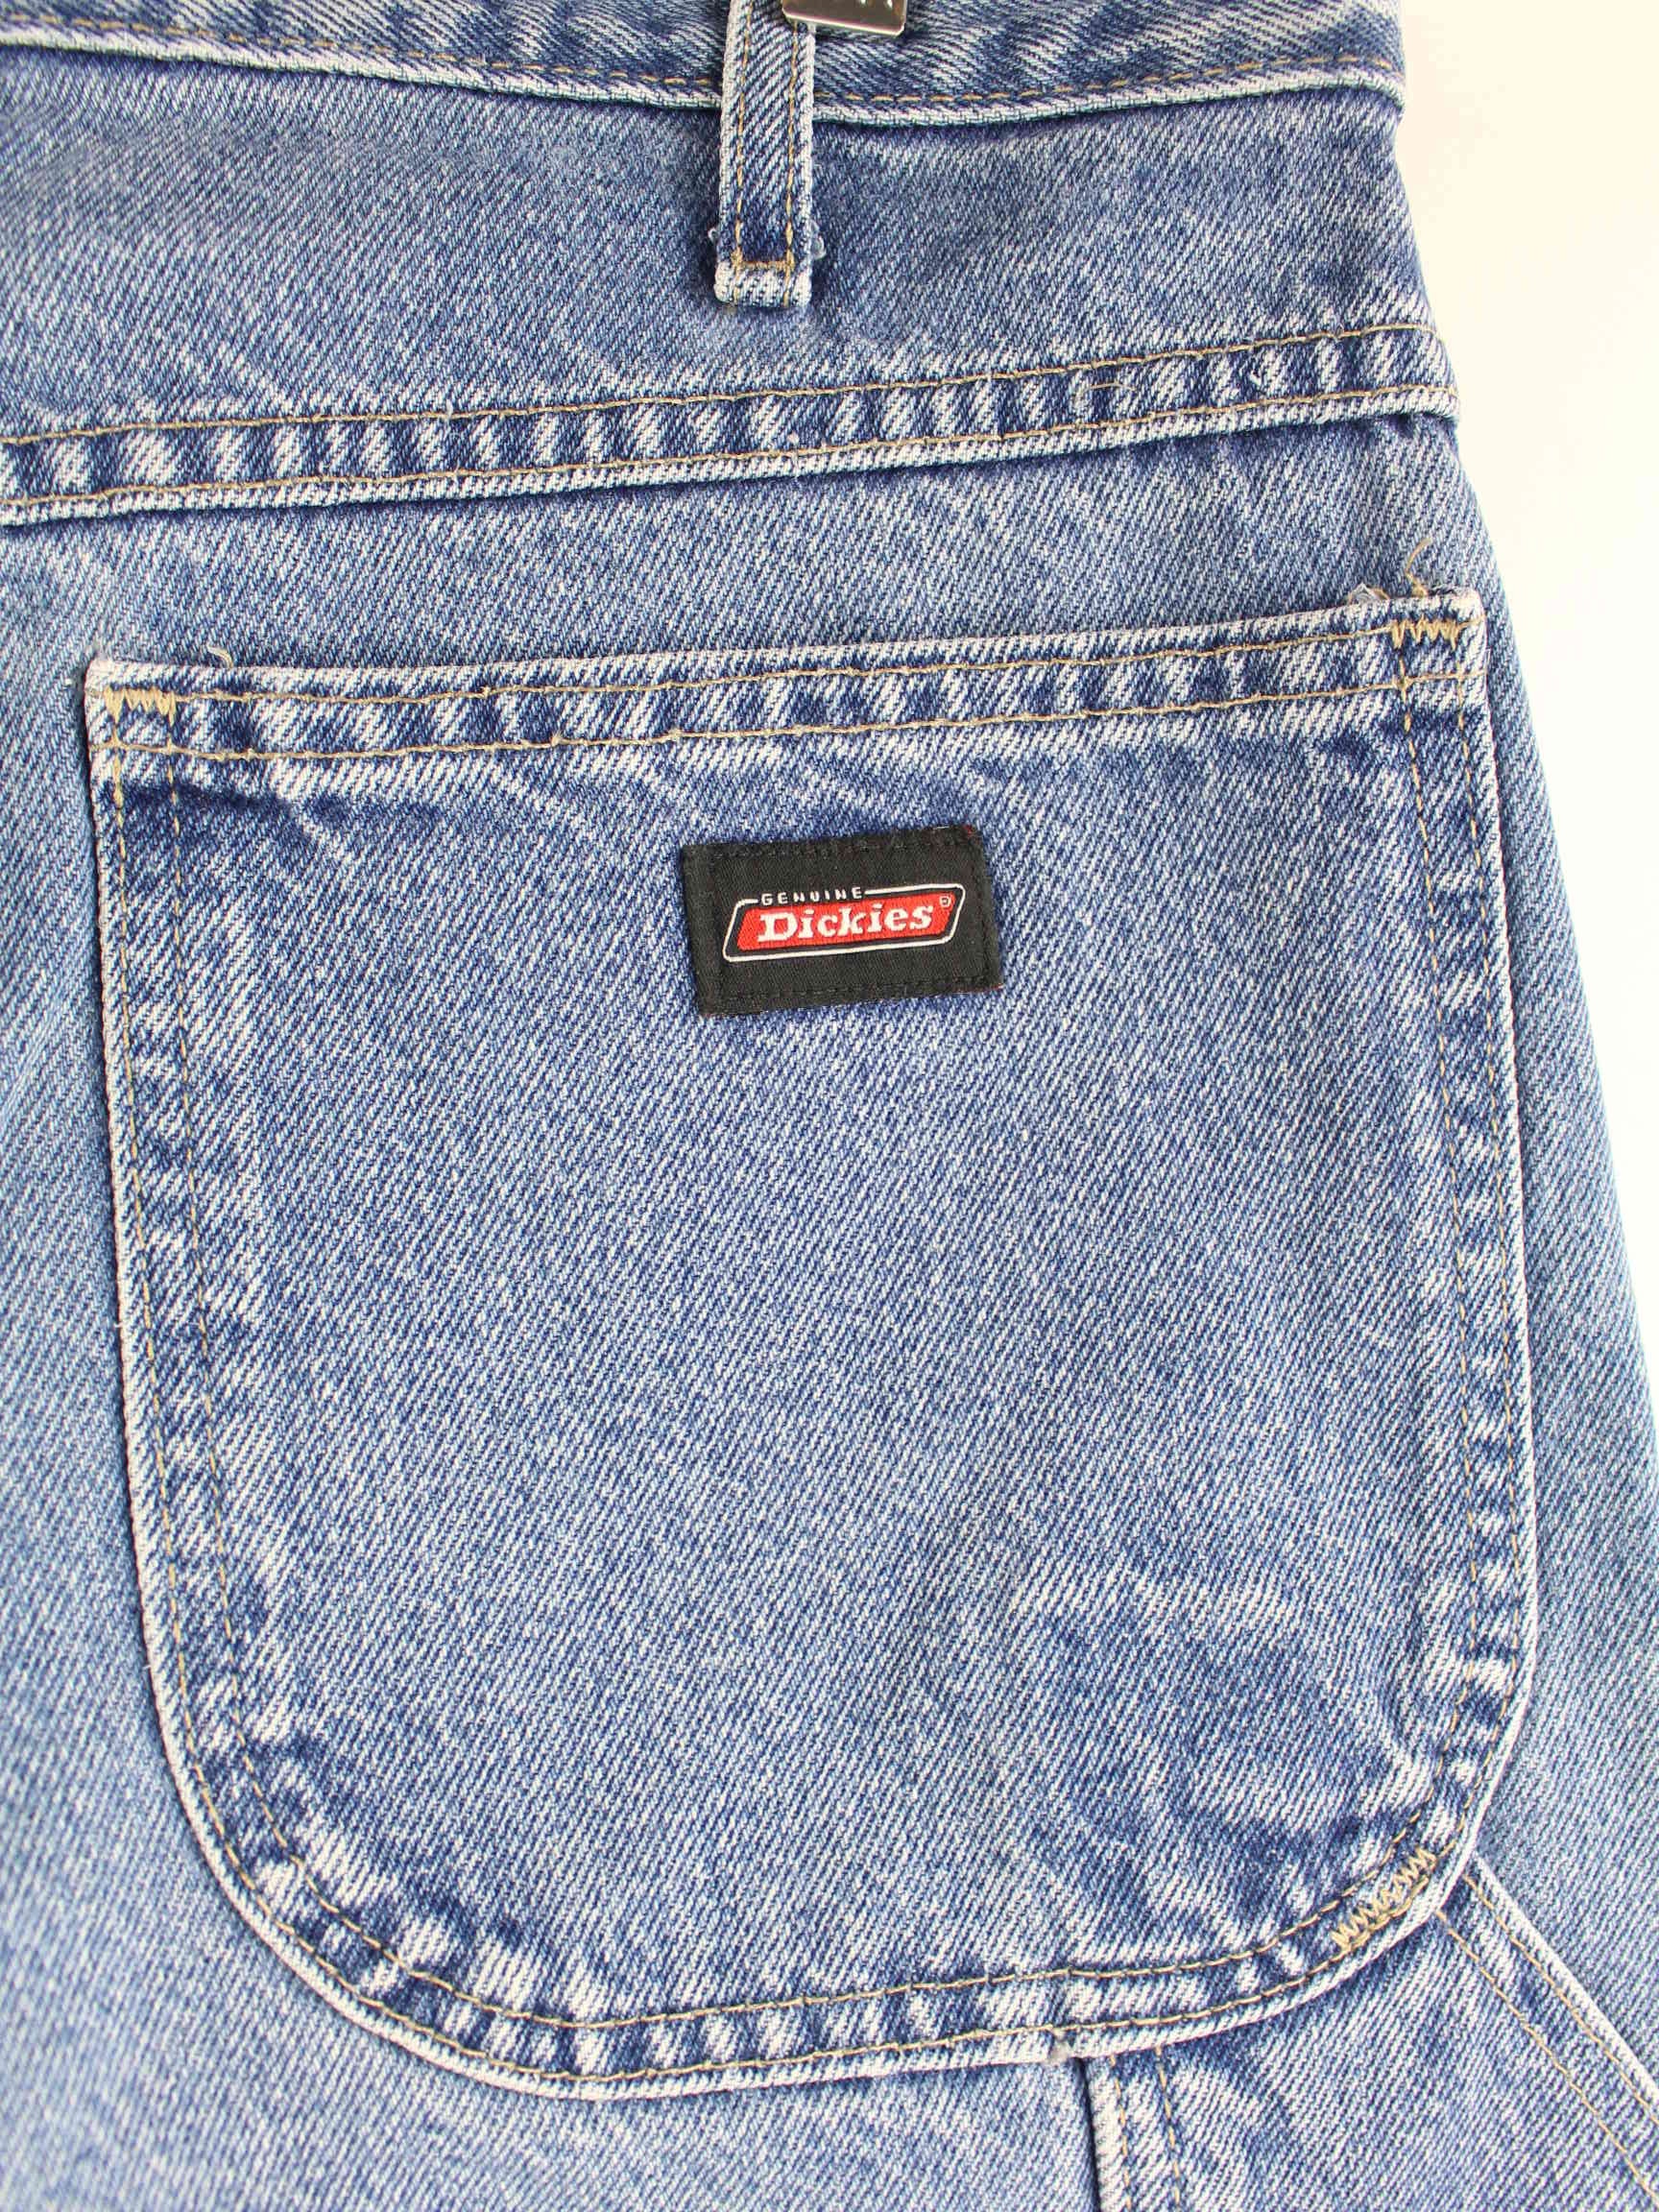 Dickies y2k Relaxed Fit Carpenter Jeans Shorts Blau  (detail image 1)